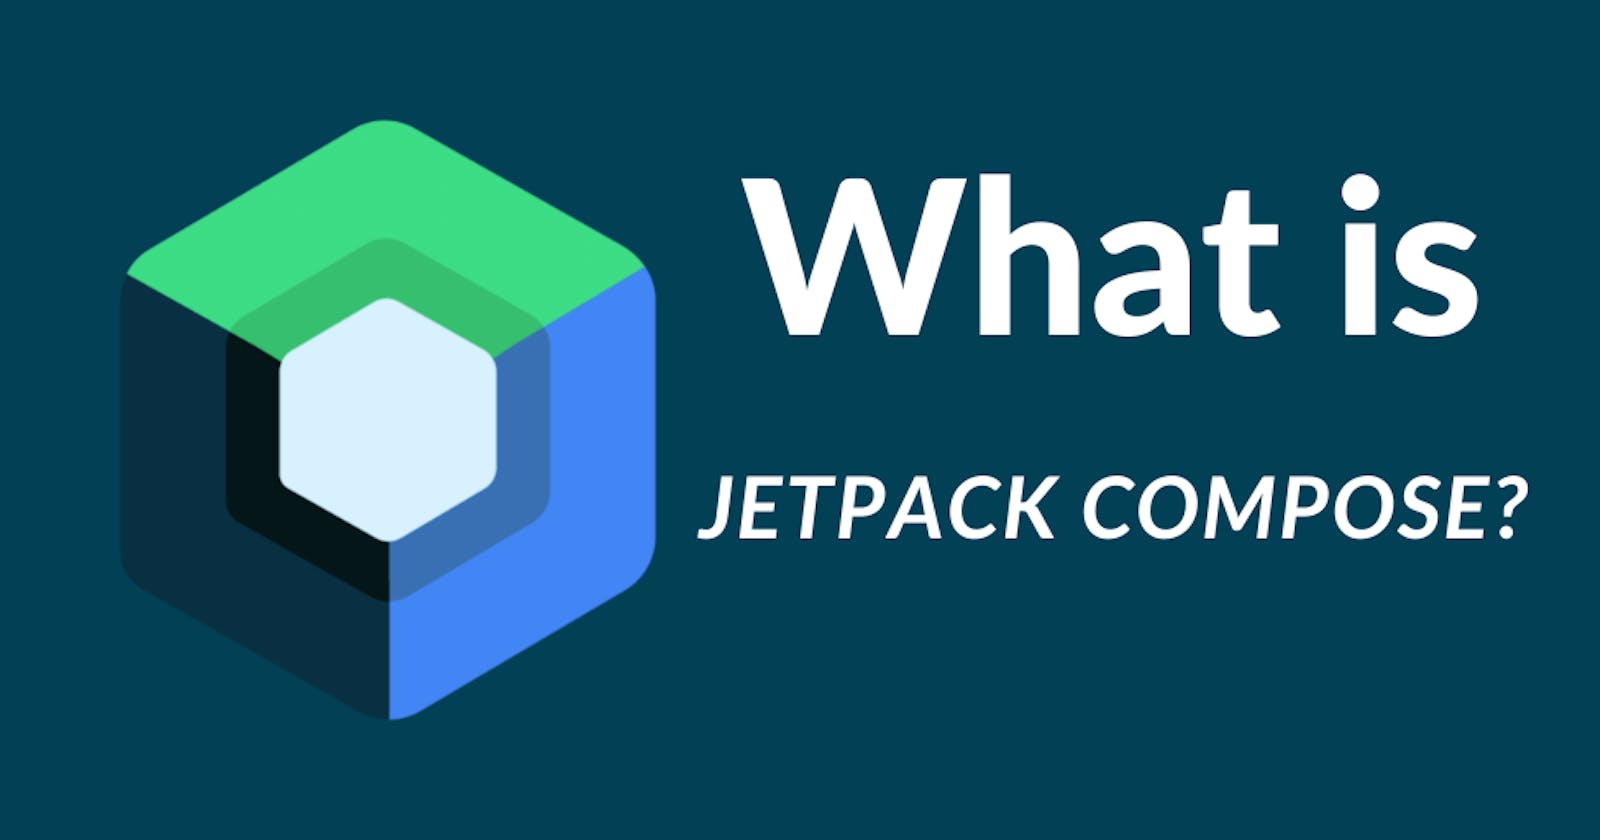 What is Jetpack Compose?